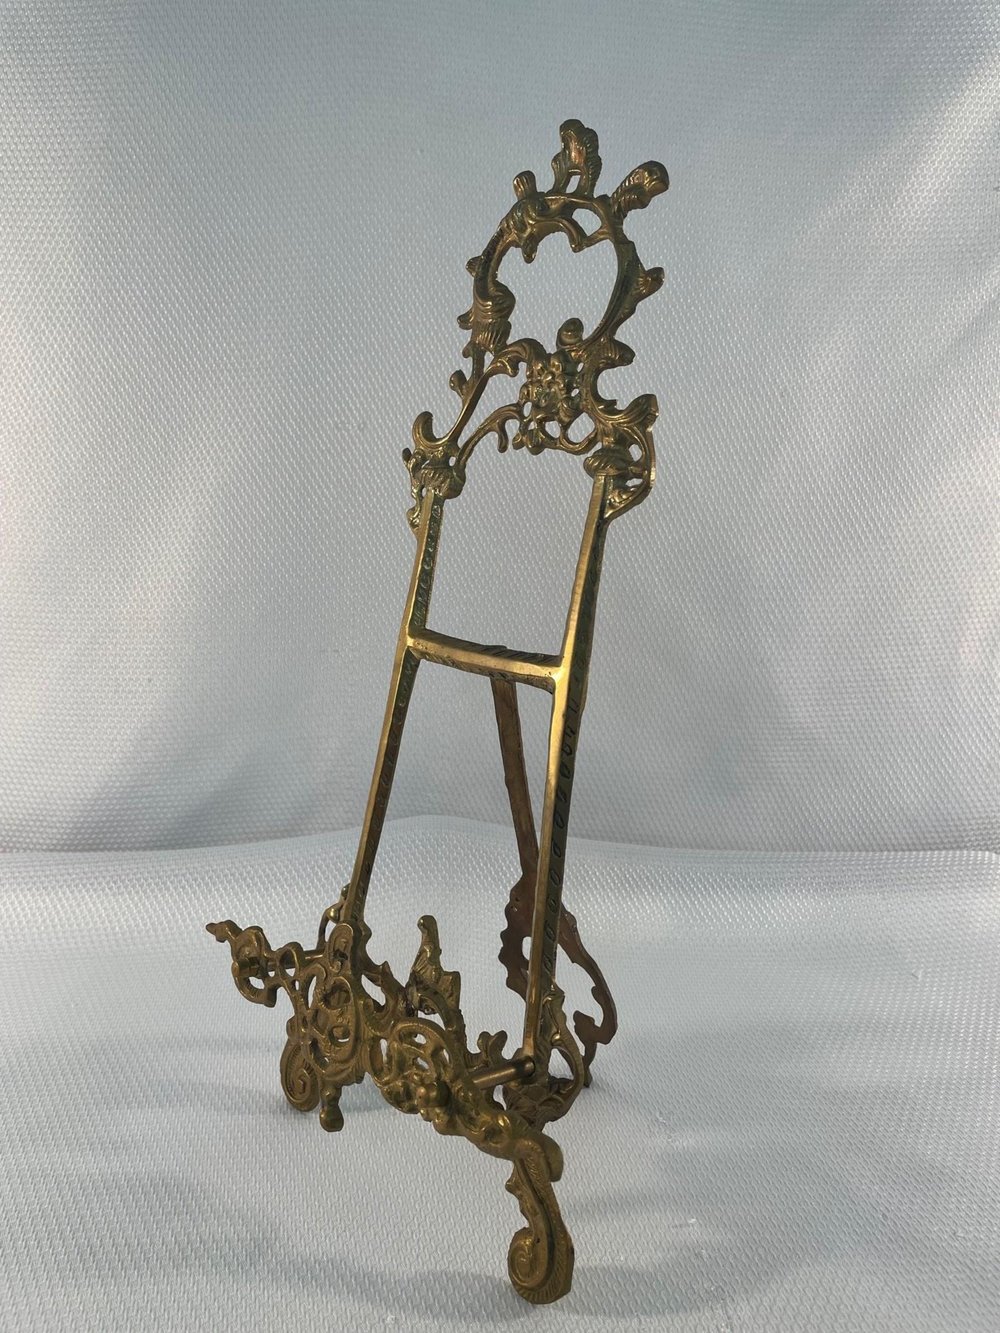 Vintage Solid Brass Easel for pictures, plates displays 9 Tall